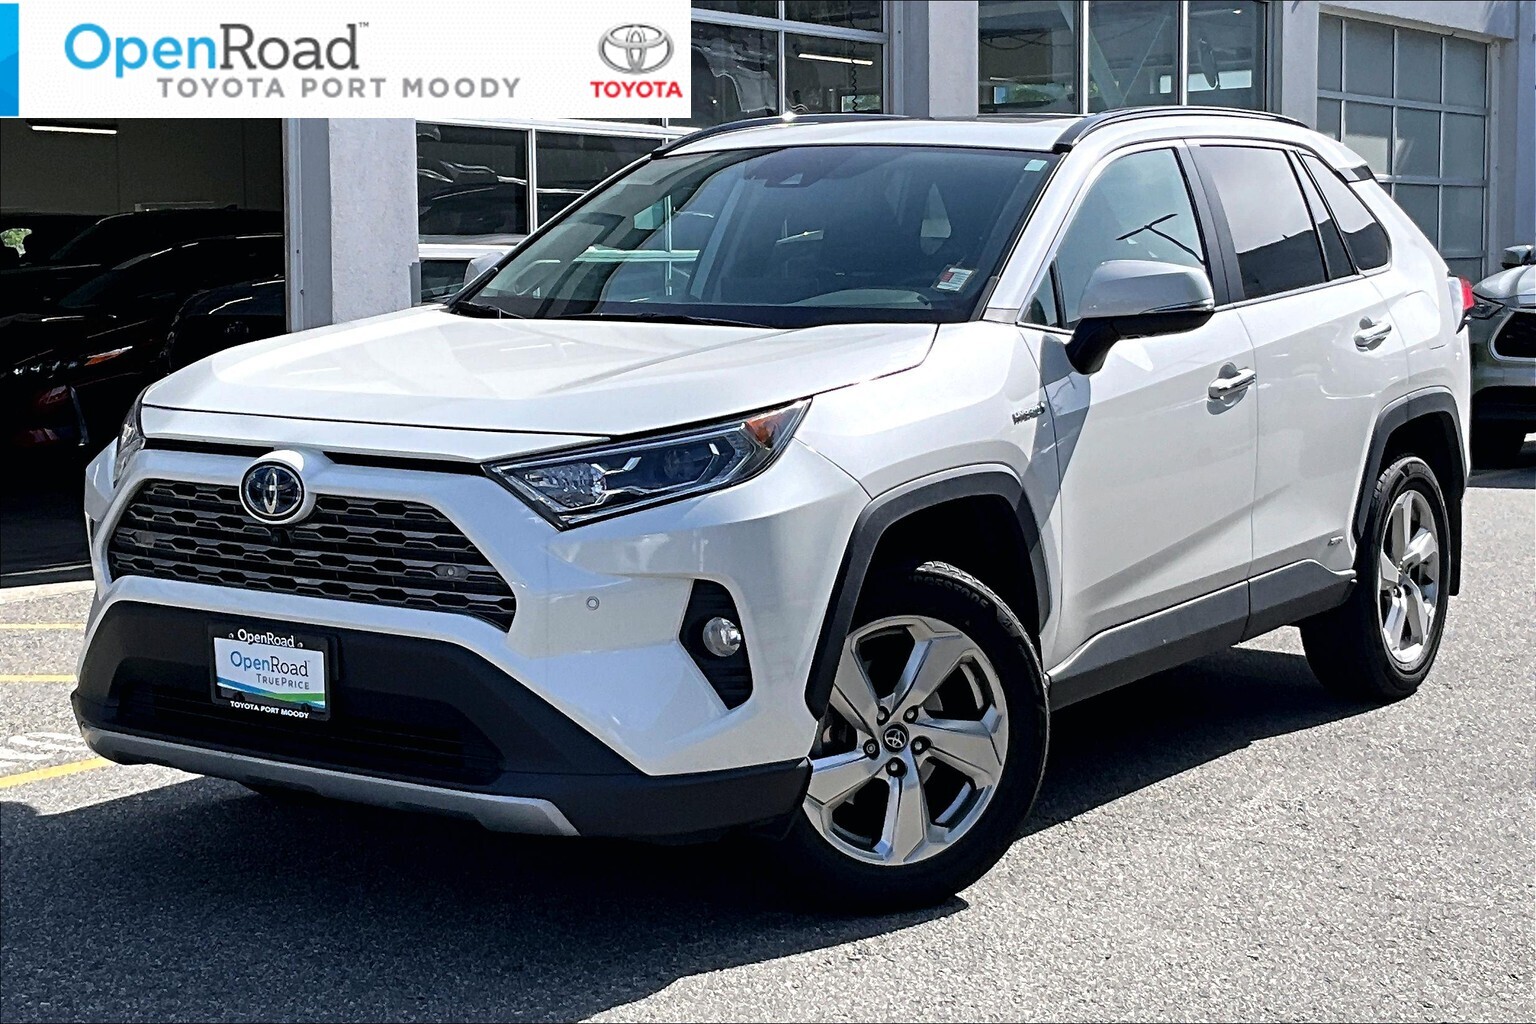 2019 Toyota RAV4 Hybrid Limited |OpenRoad True Price |Local |One Owner |No